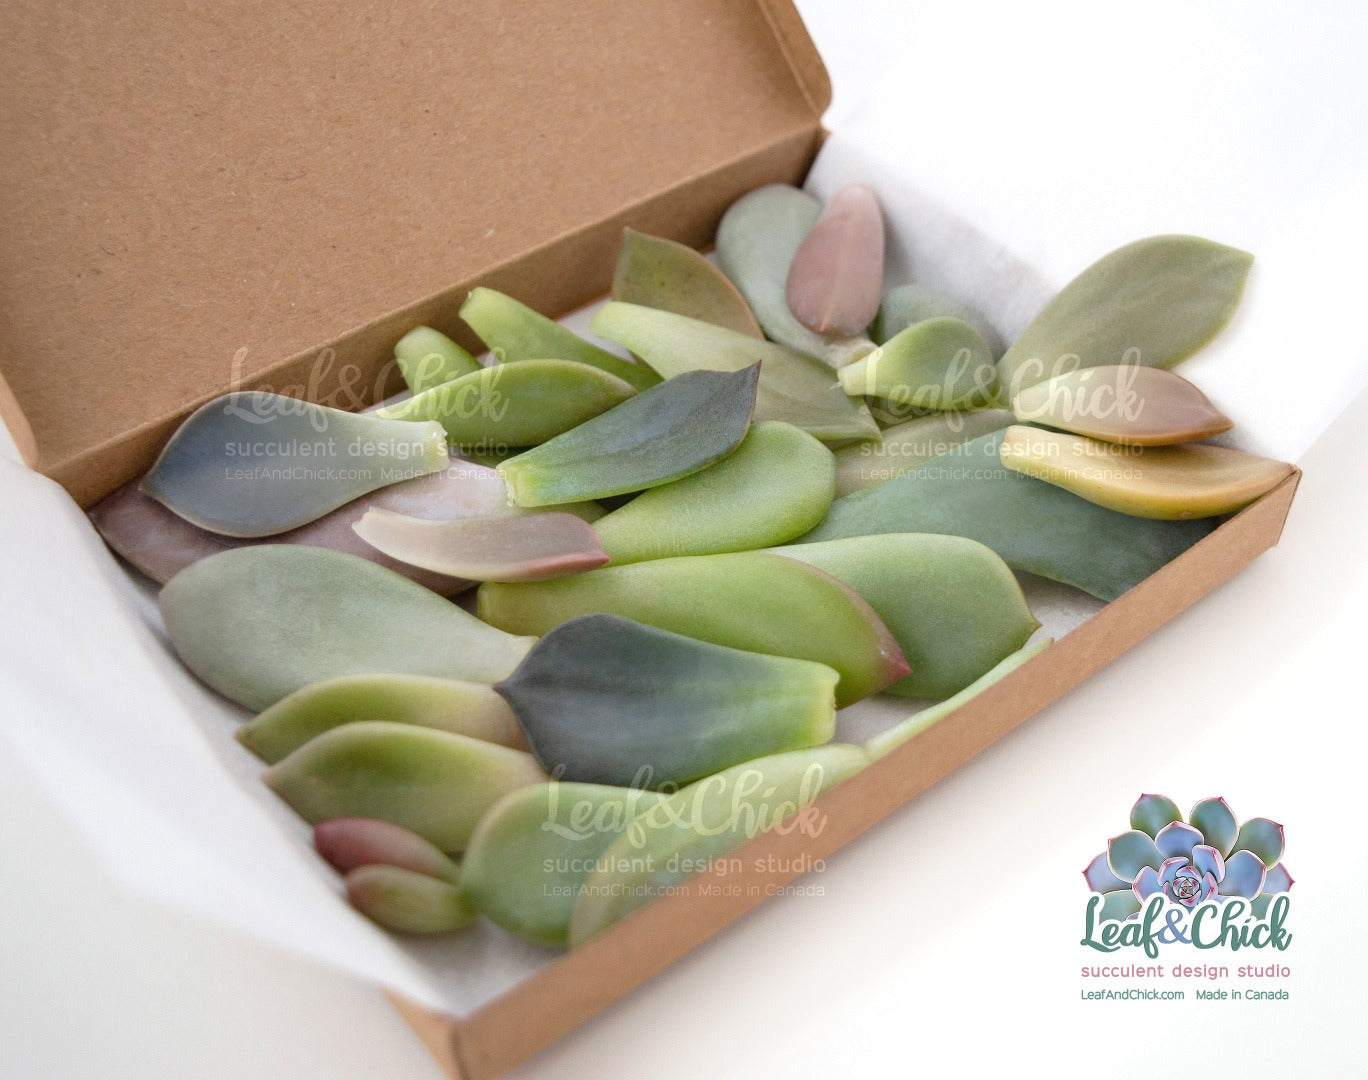 30 bulk succulent leaves boxed to ship